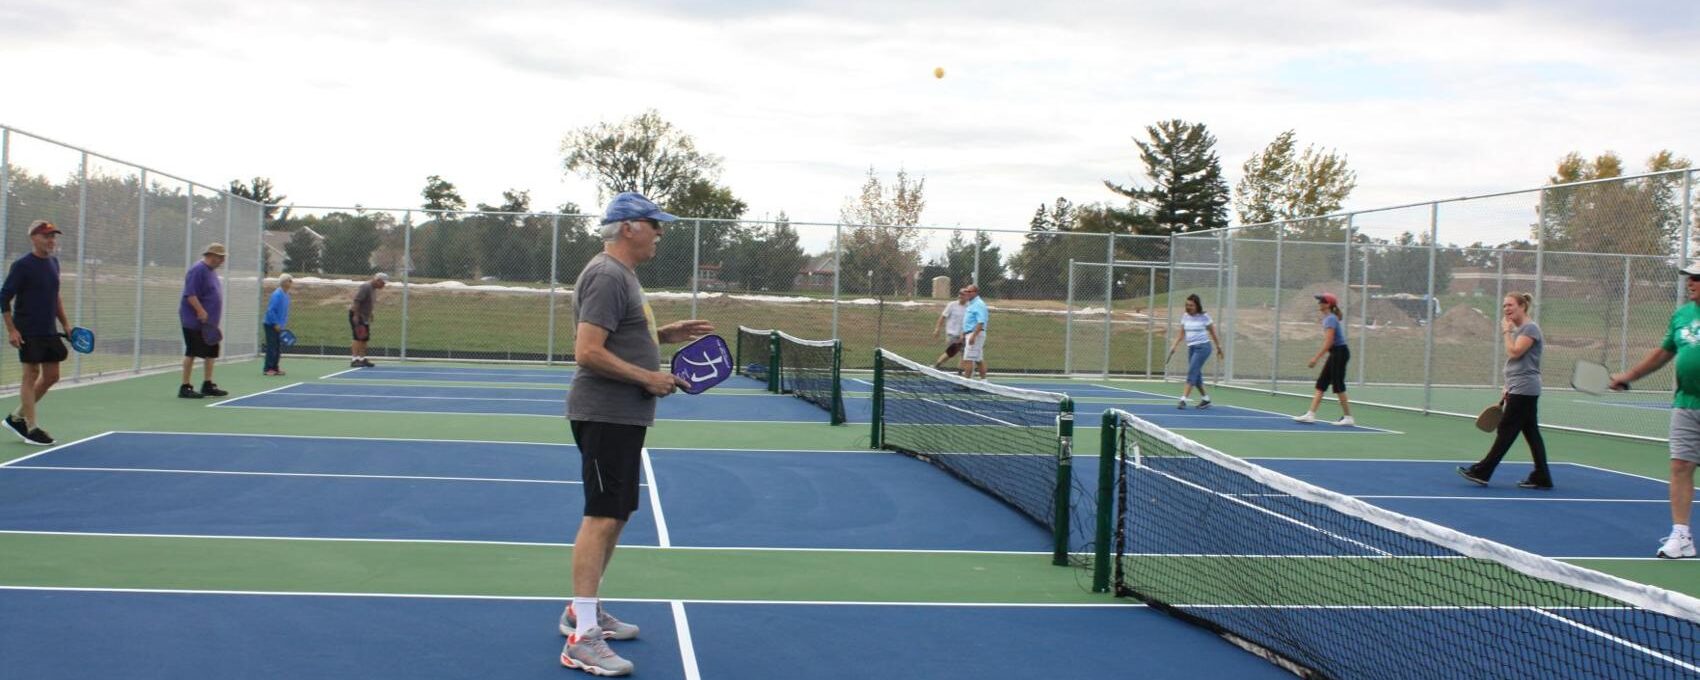 Pickleball Courts at Central Green Park. & Armed Forces Ctr. (AFC)